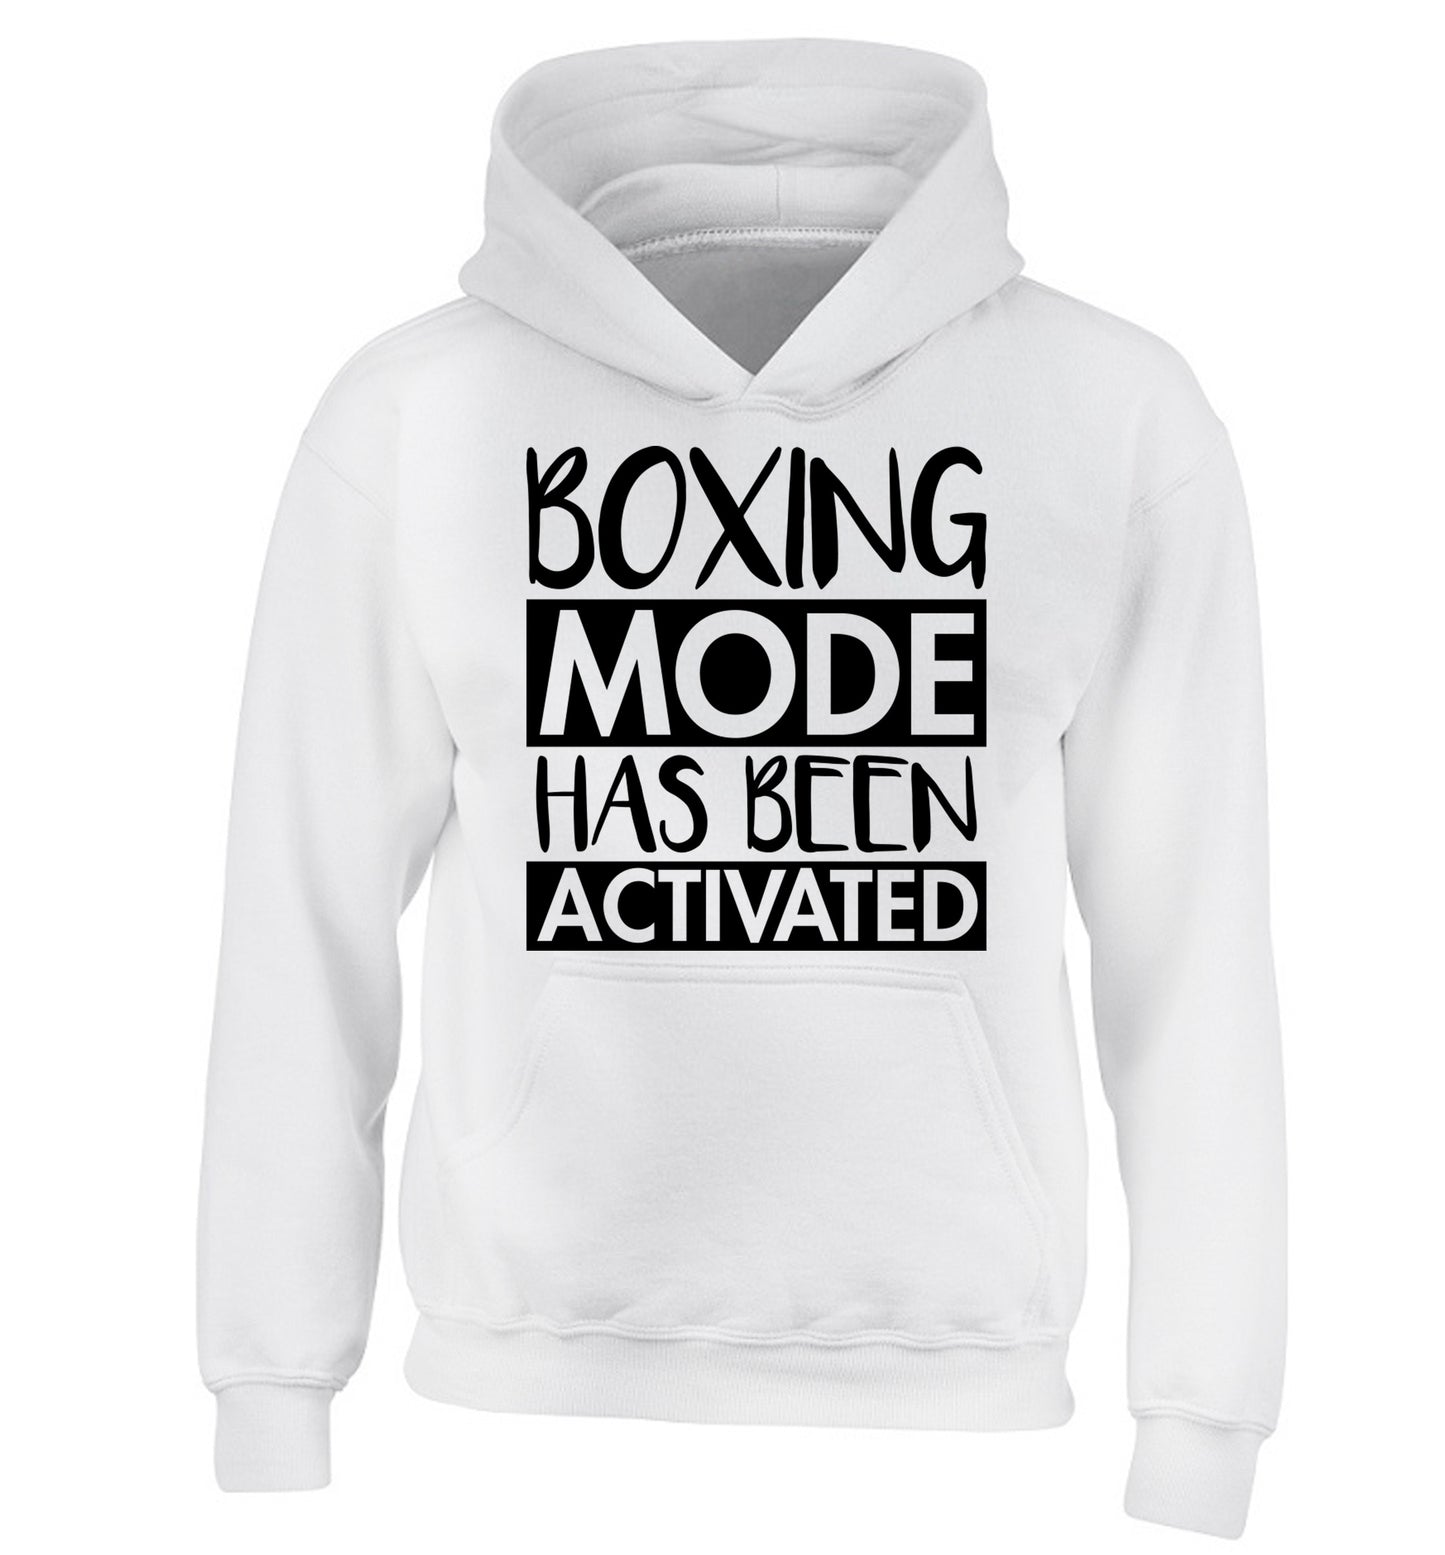 Boxing mode activated children's white hoodie 12-14 Years